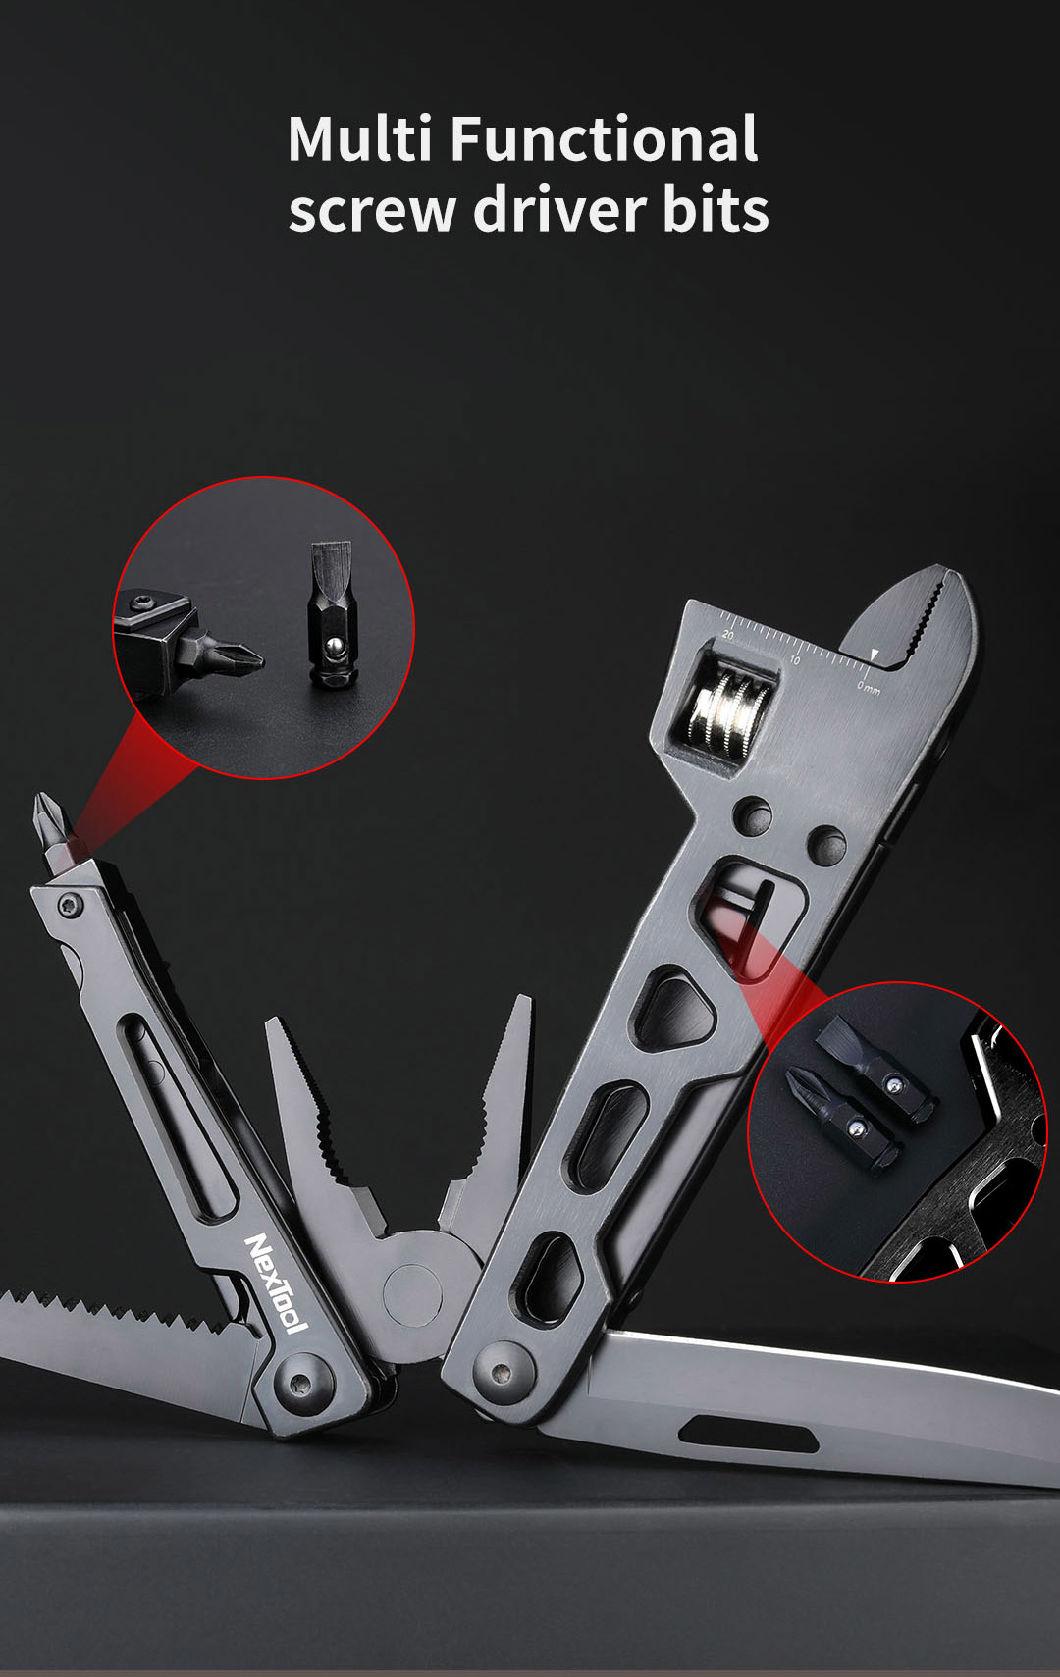 Nextool New Black Coating Wrench Multi Tool with Spanner Pliers